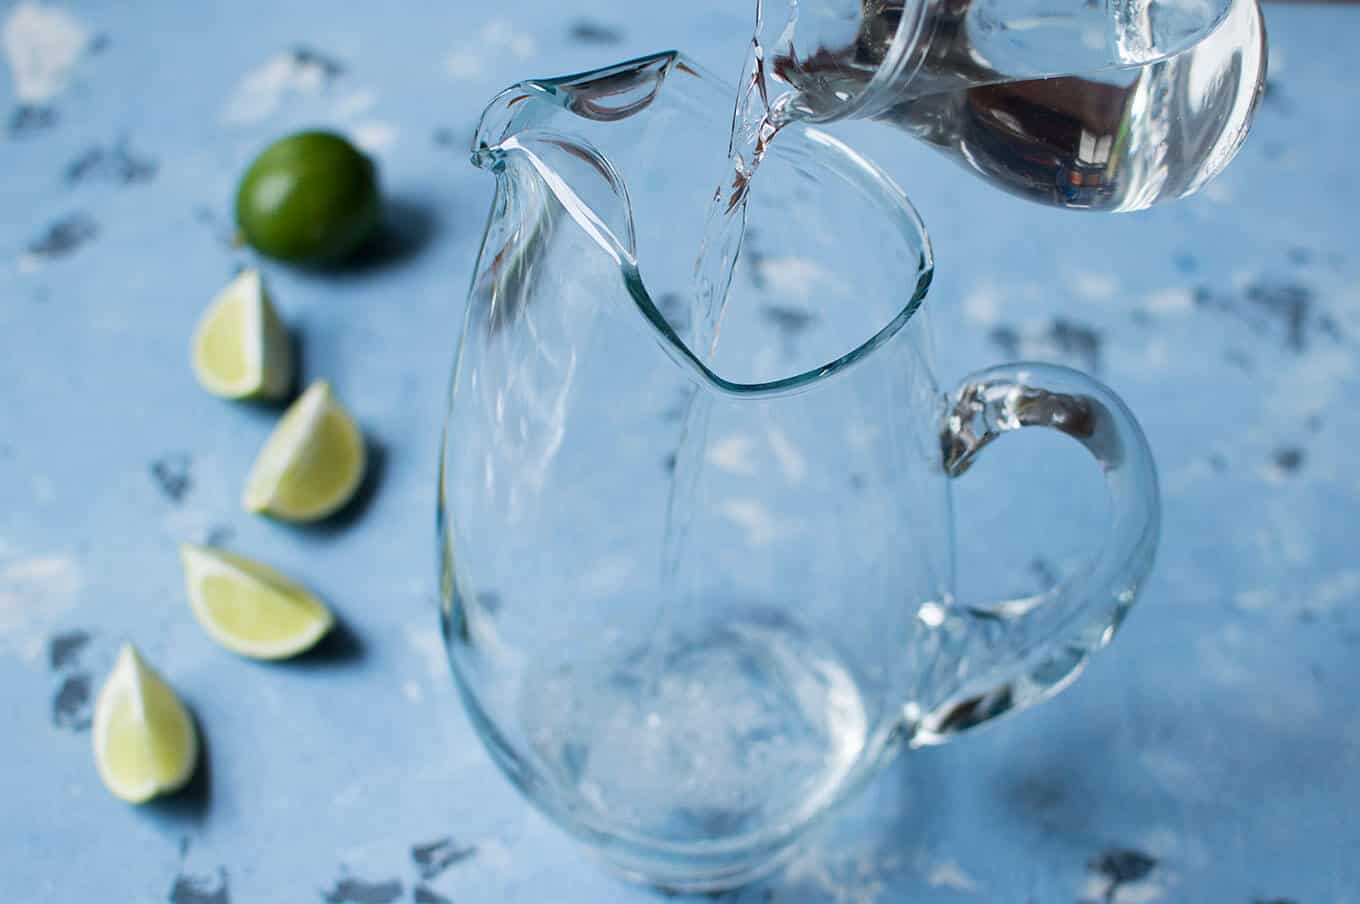 Tequila being poured into a pitcher.